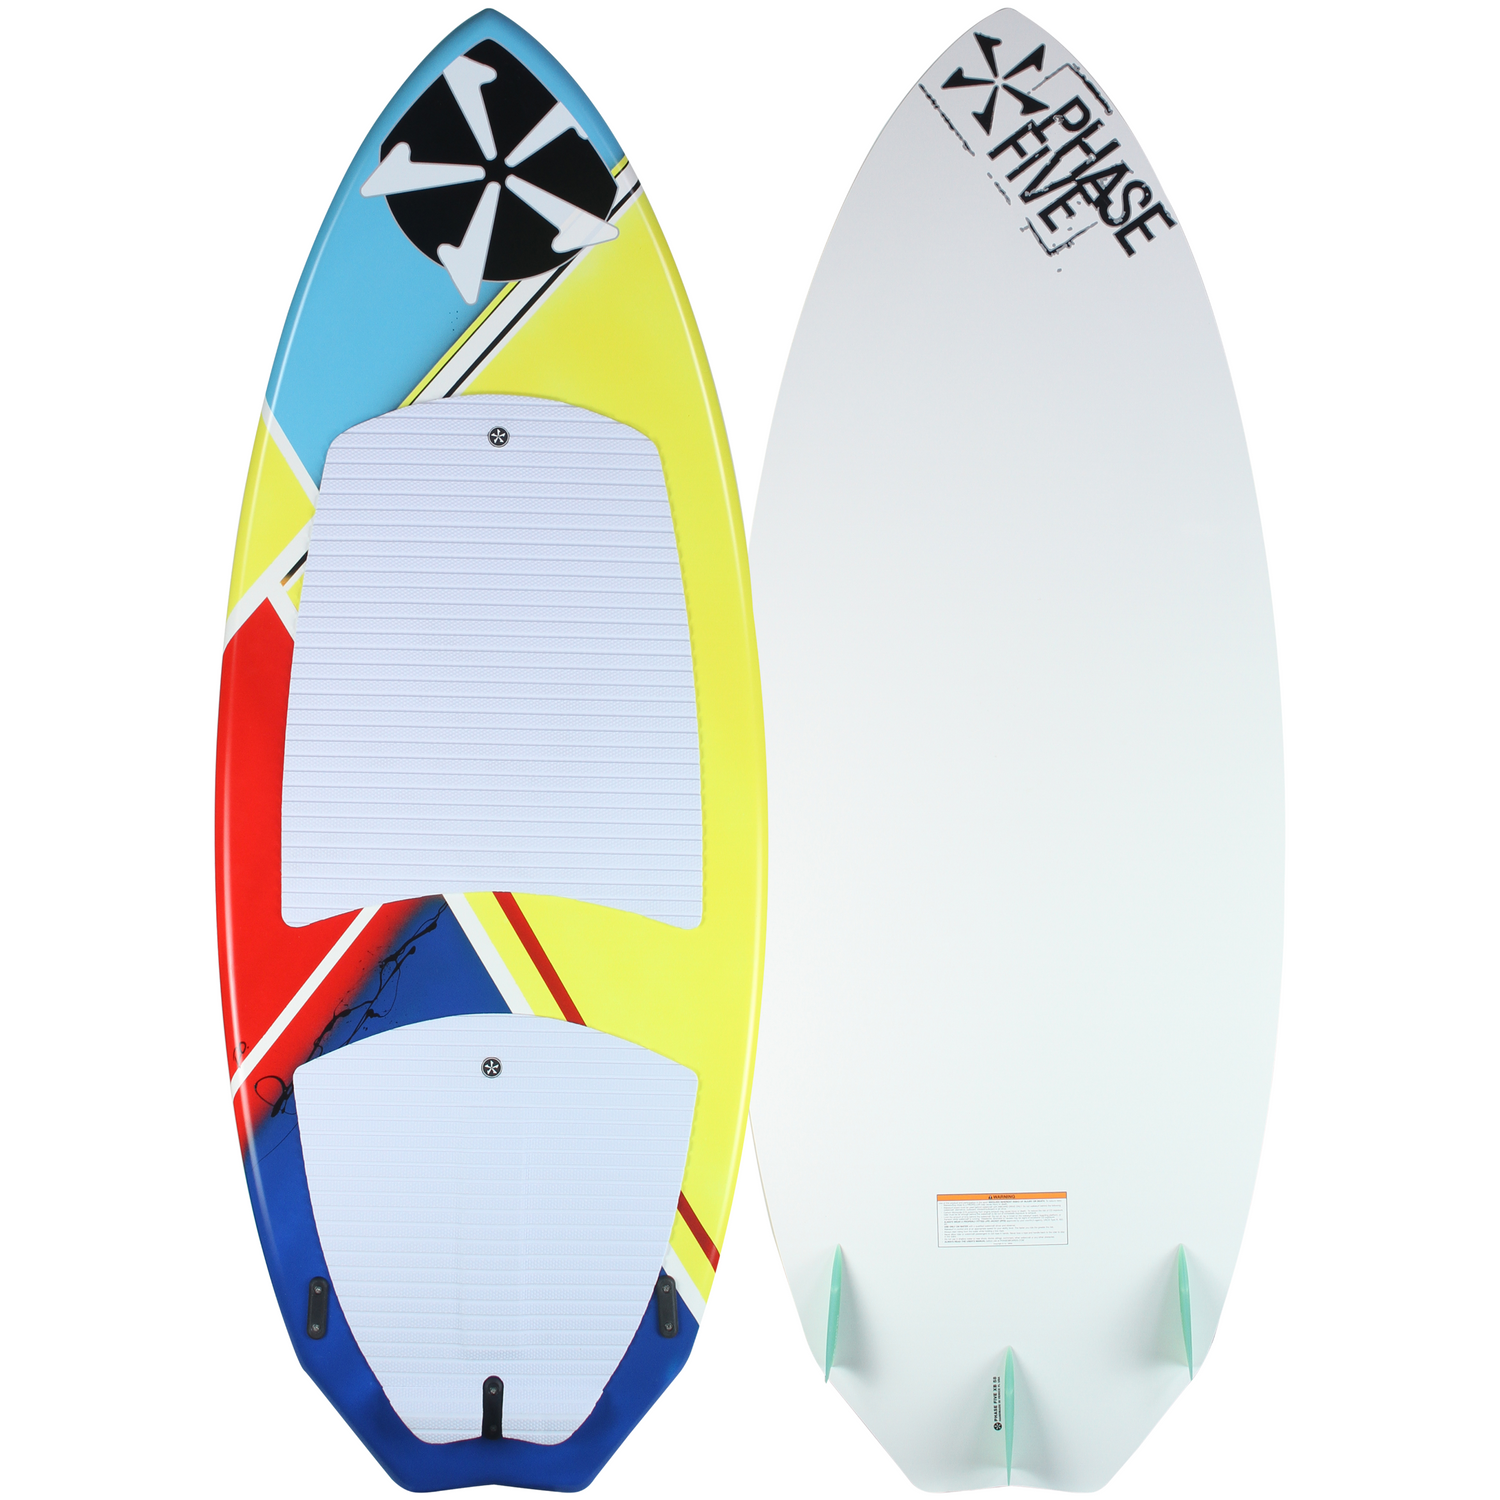 Phase 5 XB surf board in 53" front and back picture